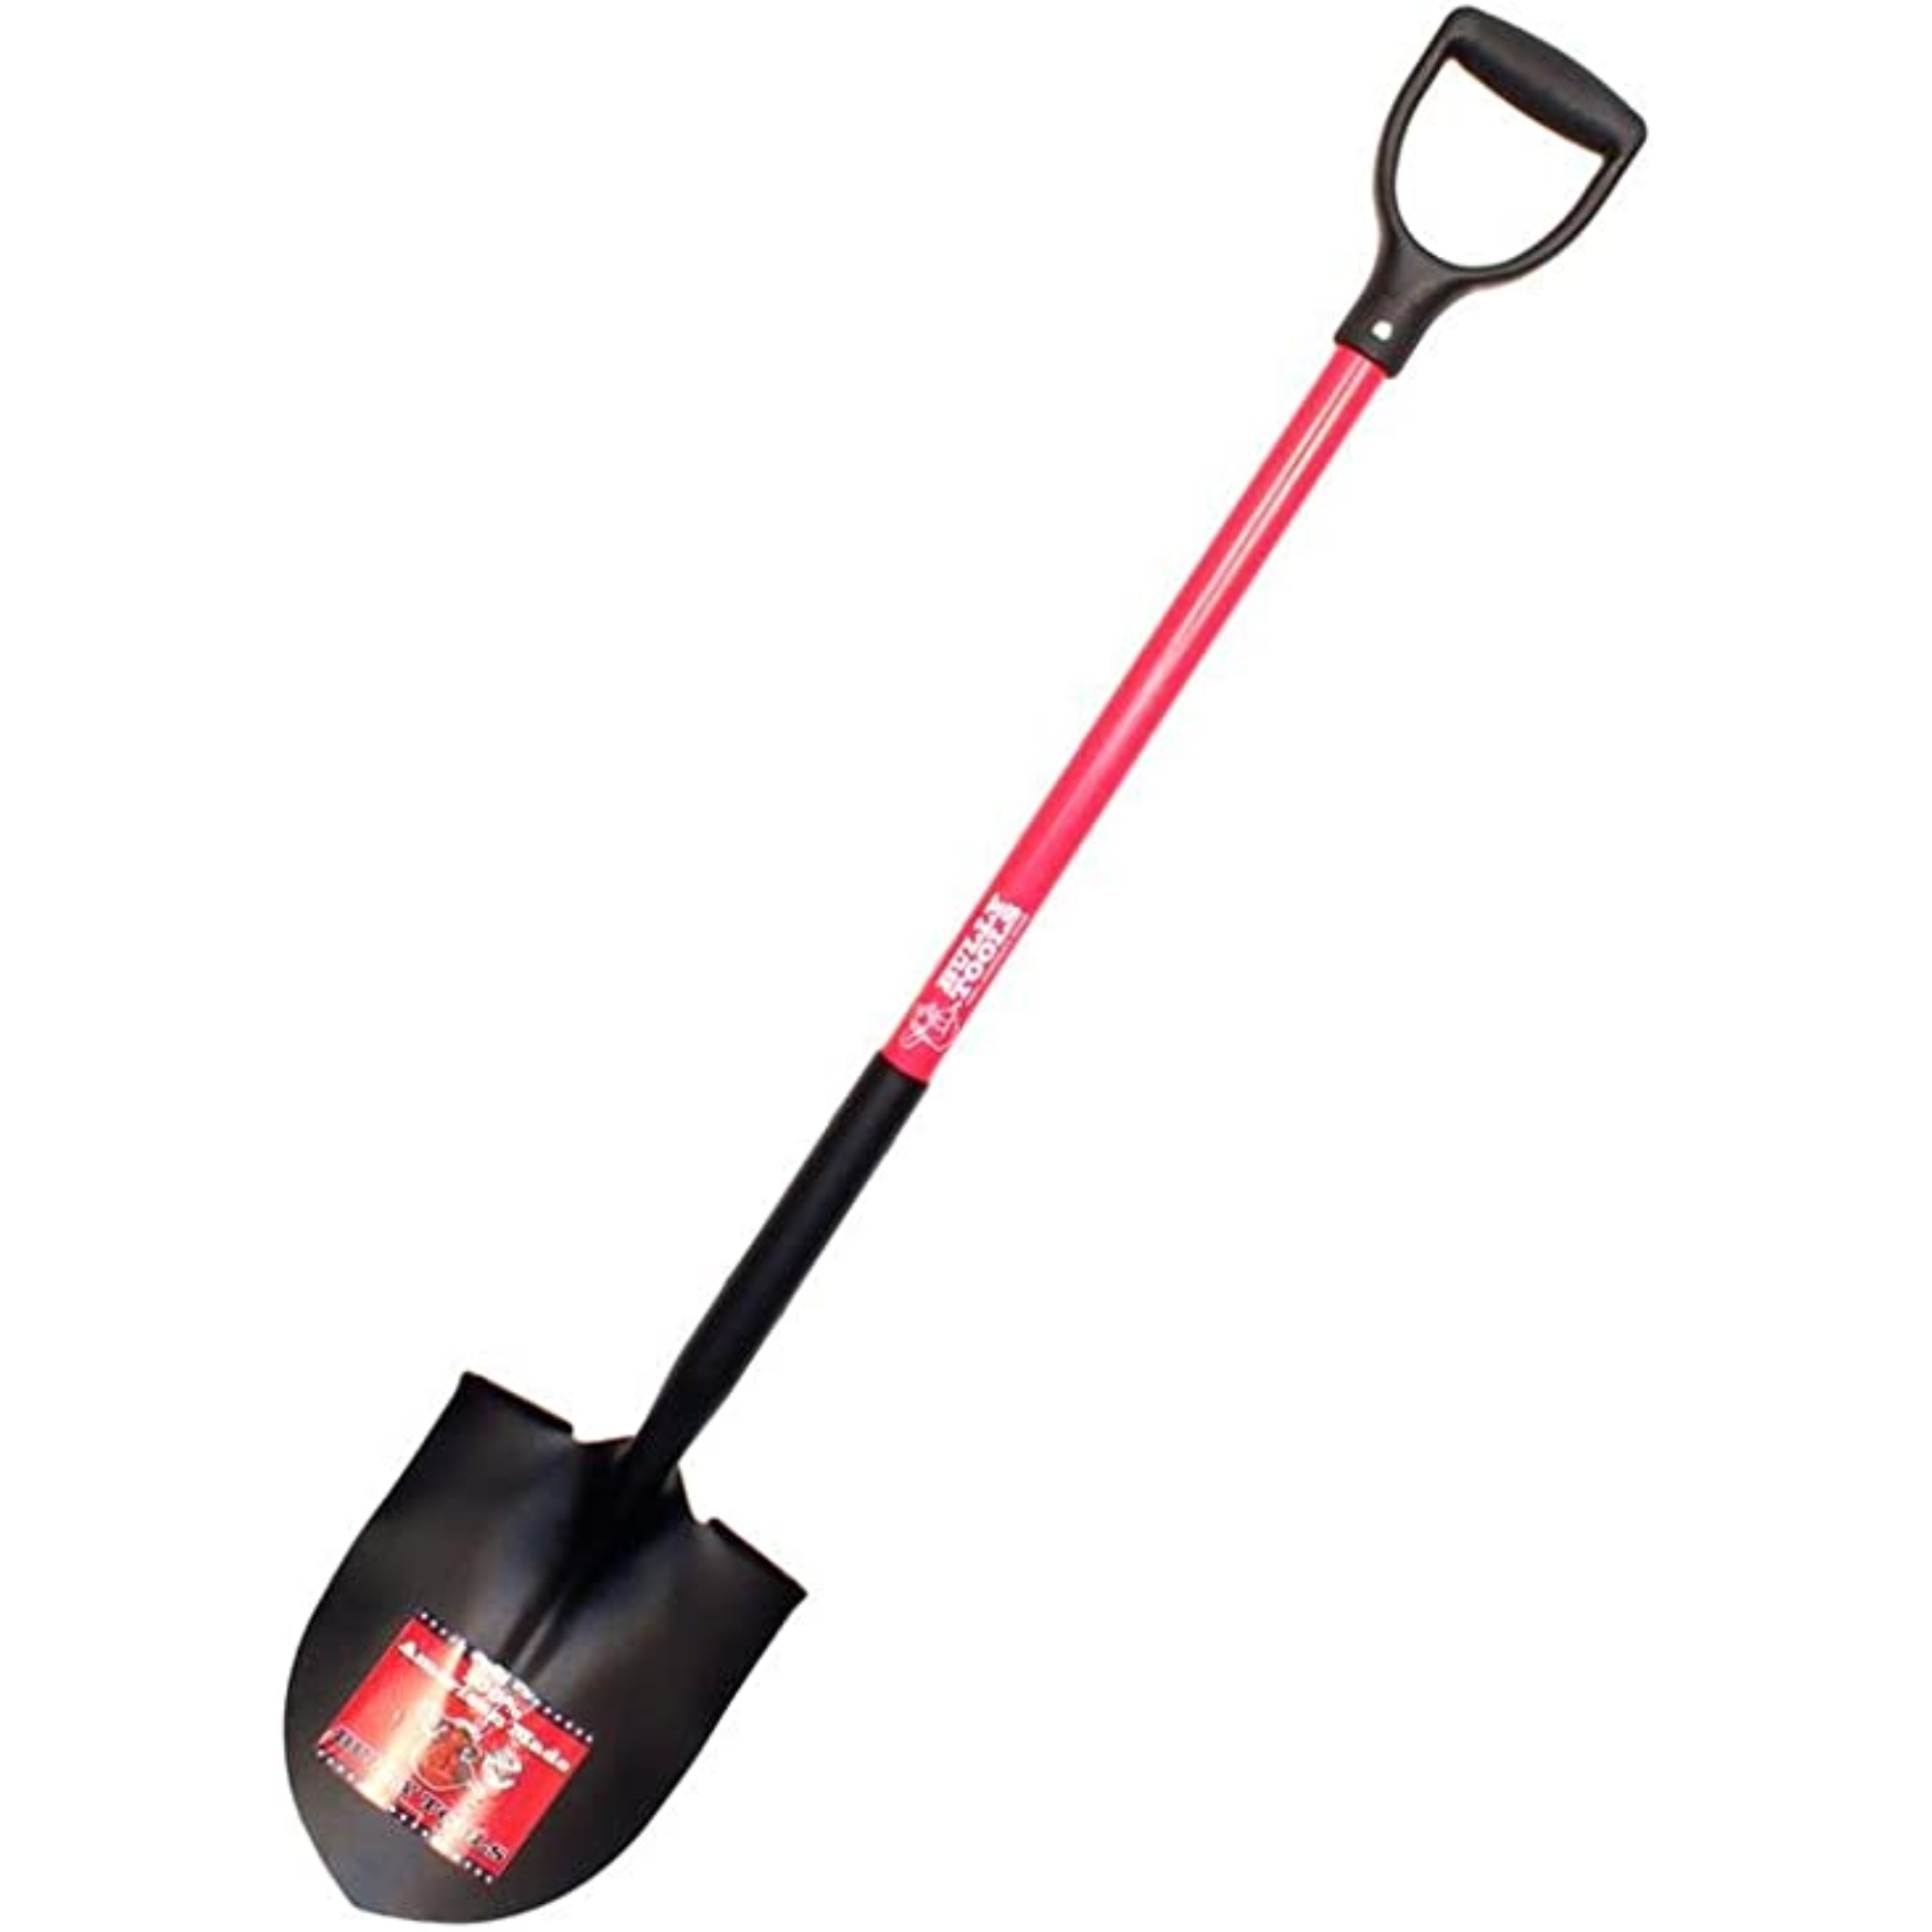 Bully Tools 82510 14-Gauge Round Point Shovel with Fiberglass D-Grip Handle, 46" - image 1 of 4